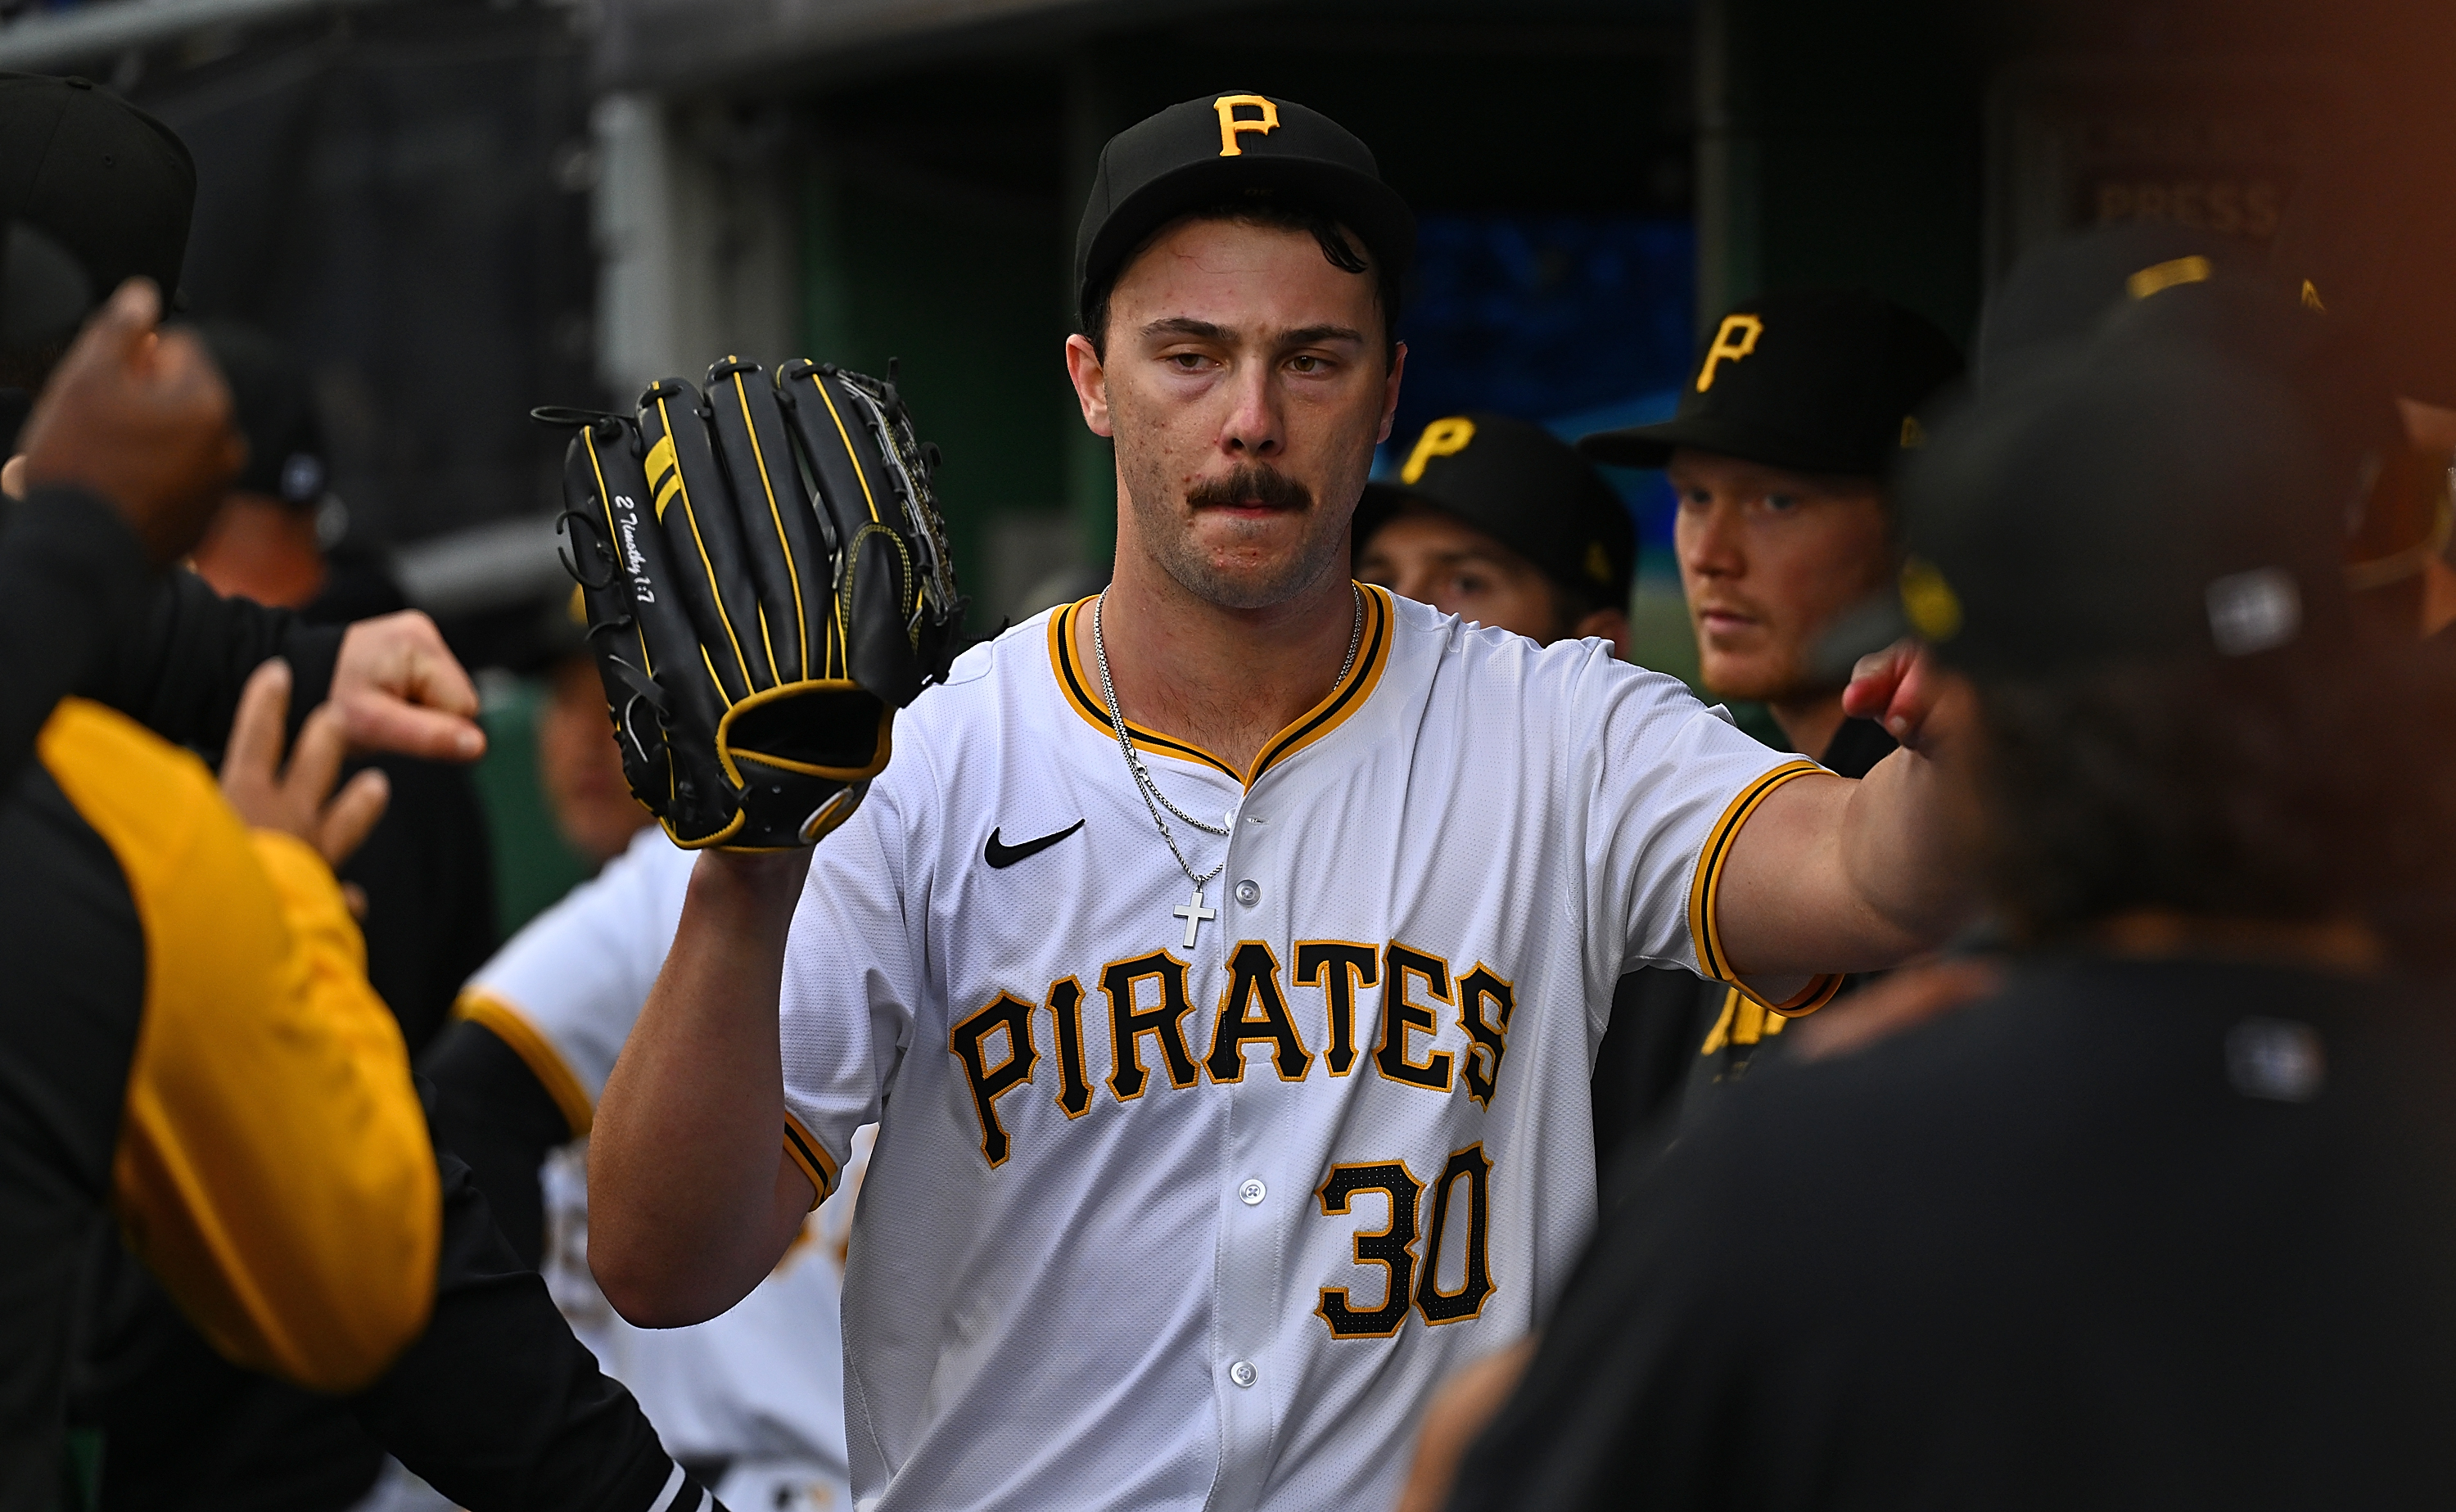 Skenes was called up to the Pirates this week after skyrocketing in the minor leagues